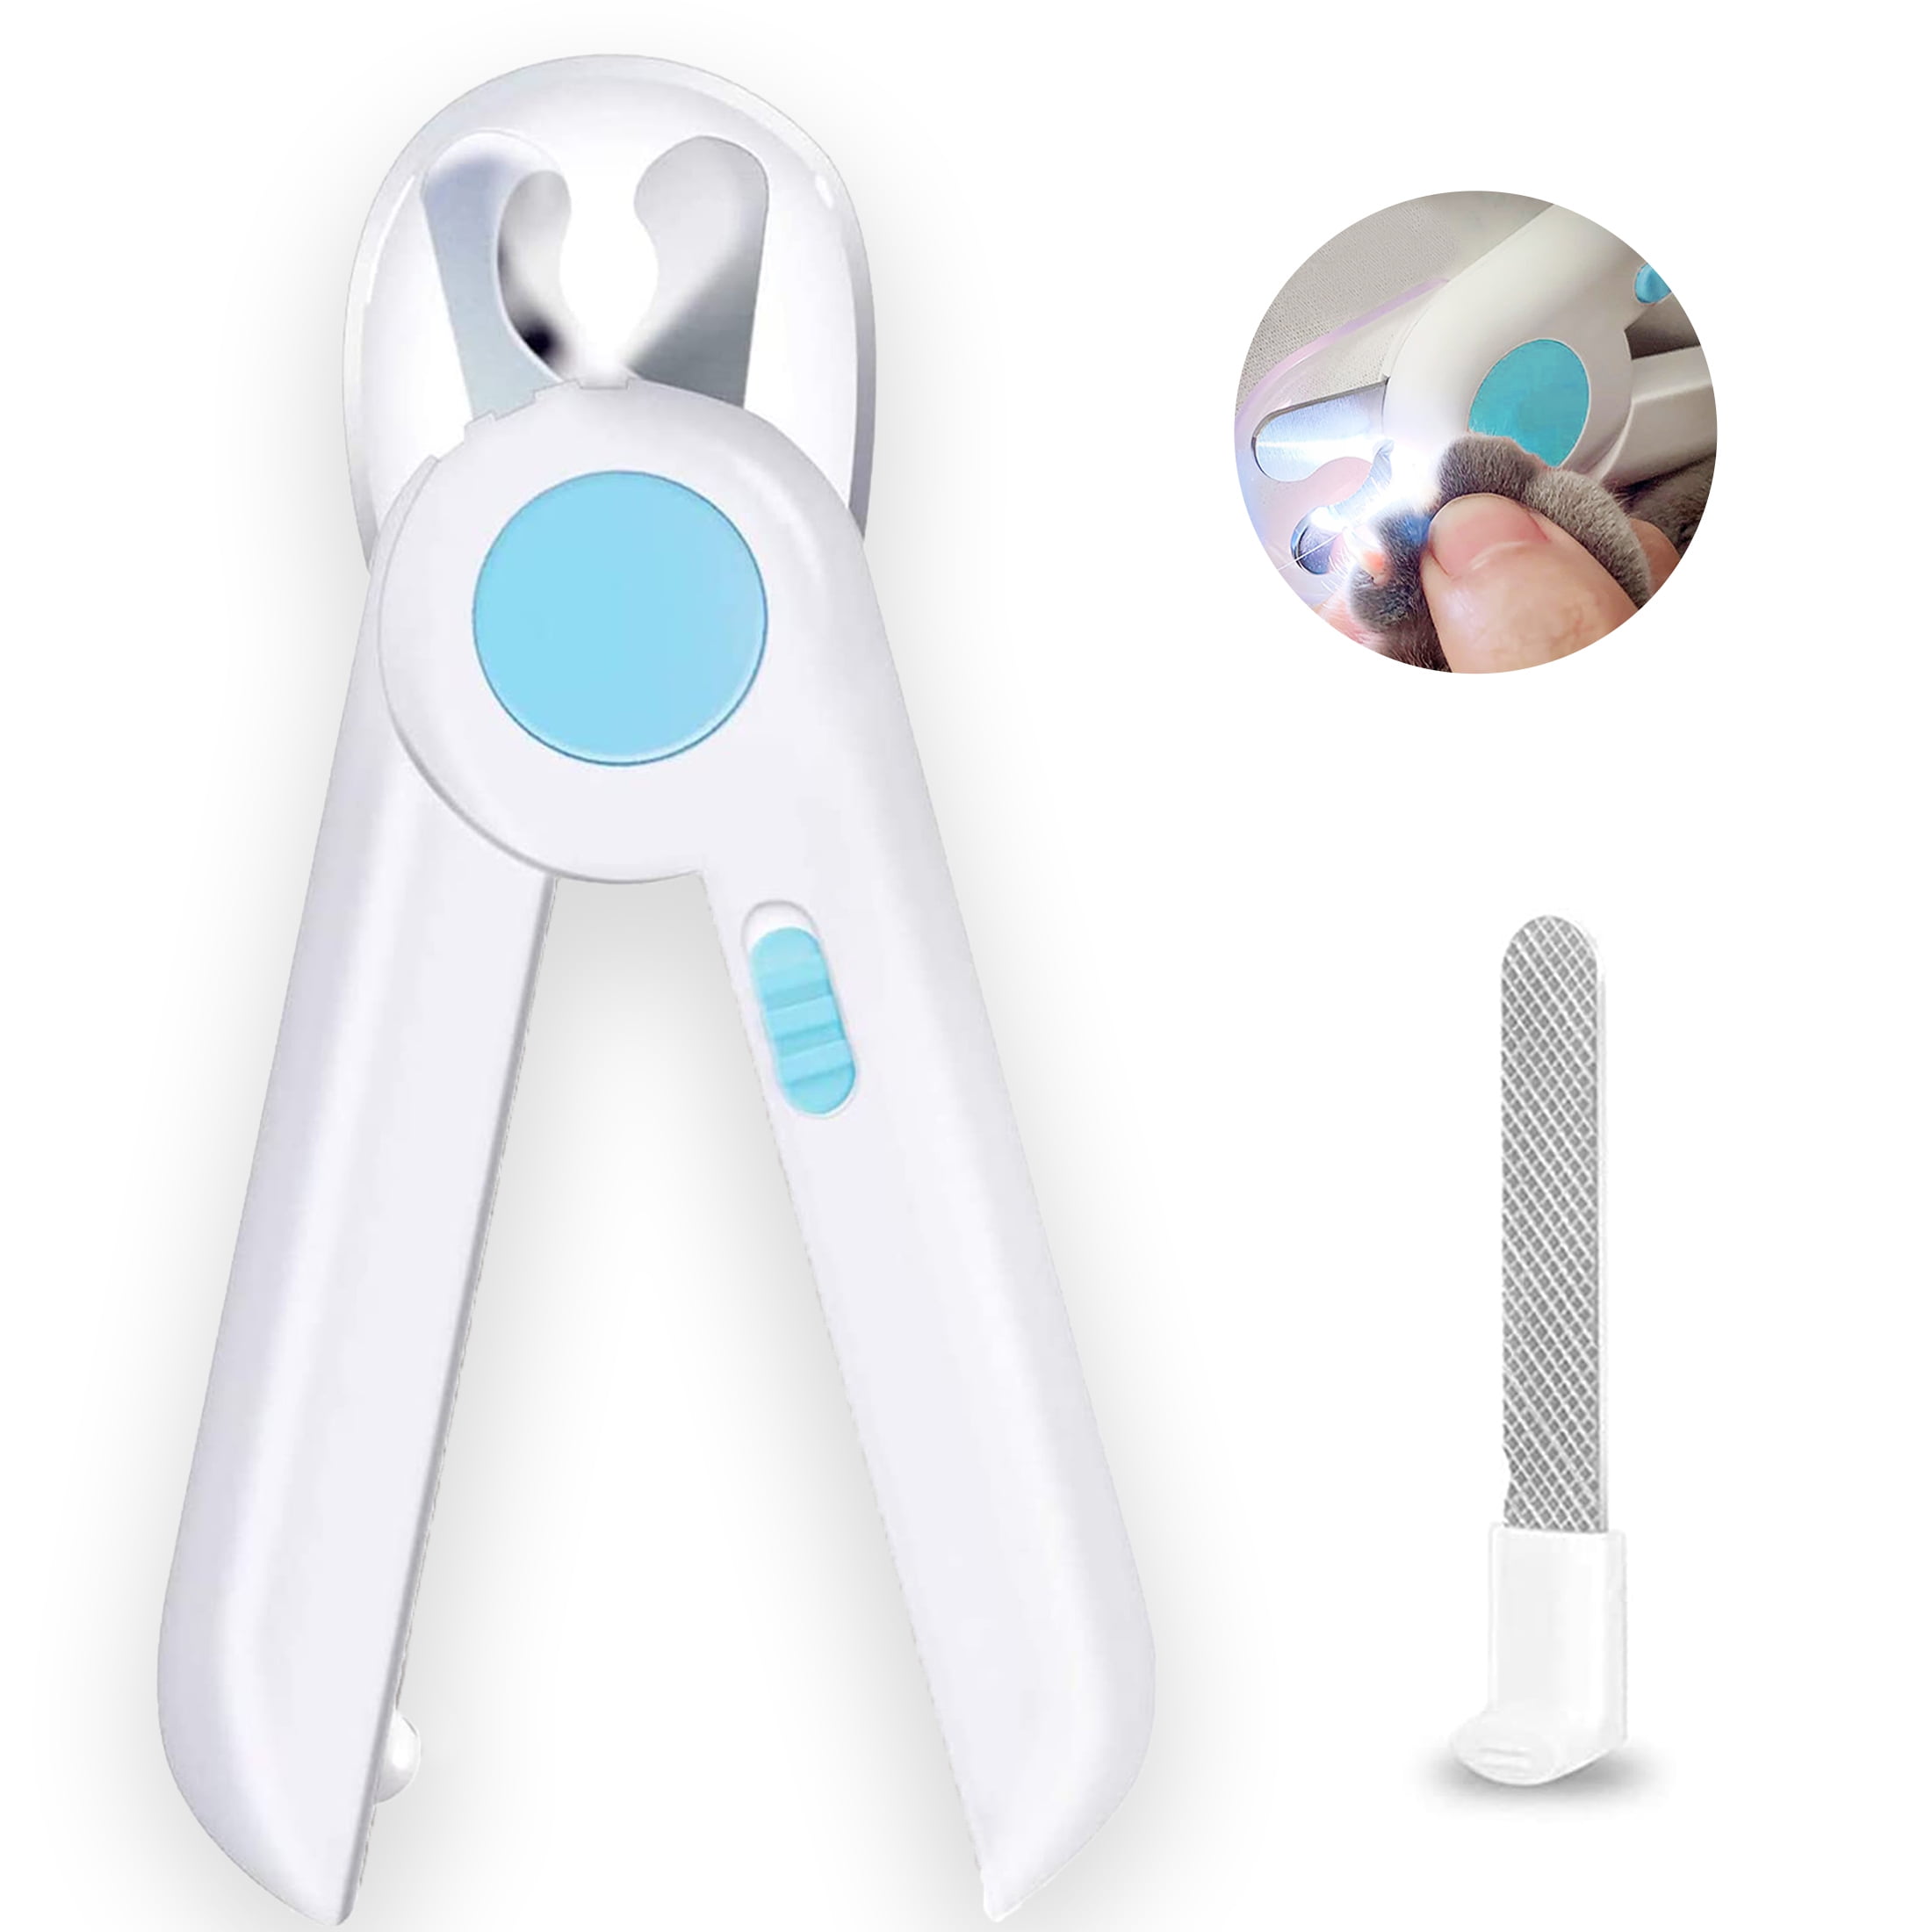 ZUHAUMATE Cat Nail Clipper Pets Toenail Clippers Trimmers LED Light Avoid Over Cutting Claw Clipper Small Dogs Free File Razor Sharp Blade 92857e31 44cb 436c b33d 1e805aef7eb7.5c673b9e288d24fd20e4f8c01a9fc76f